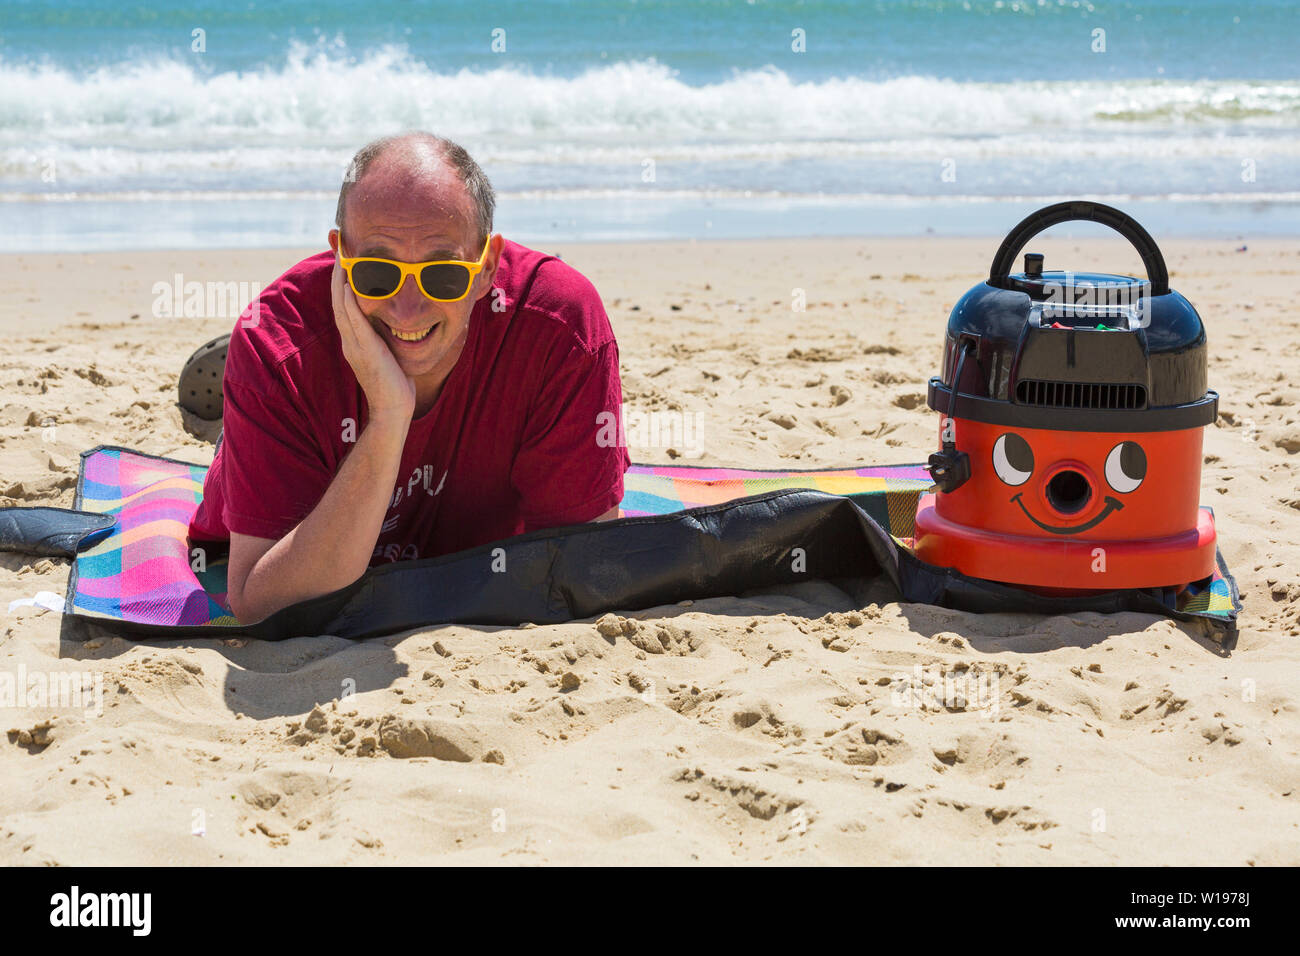 Bournemouth, Dorset, UK. 1st July 2019. Almost all workers are legally entitled to 5.6 weeks’ statutory leave entitlement paid holiday per year, but when was the last time Henry or Hetty had a day off? John took his hands off the nozzle, switched off the turbo charge and gave this hard working Hoover an afternoon off at Bournemouth beach. It also made a statement to make sure the beautiful Bournemouth, Christchurch & Poole beaches gain an awareness of the litter left behind every summer and that Henry and Hetty don't approve! Credit: Carolyn Jenkins/Alamy Live News Stock Photo